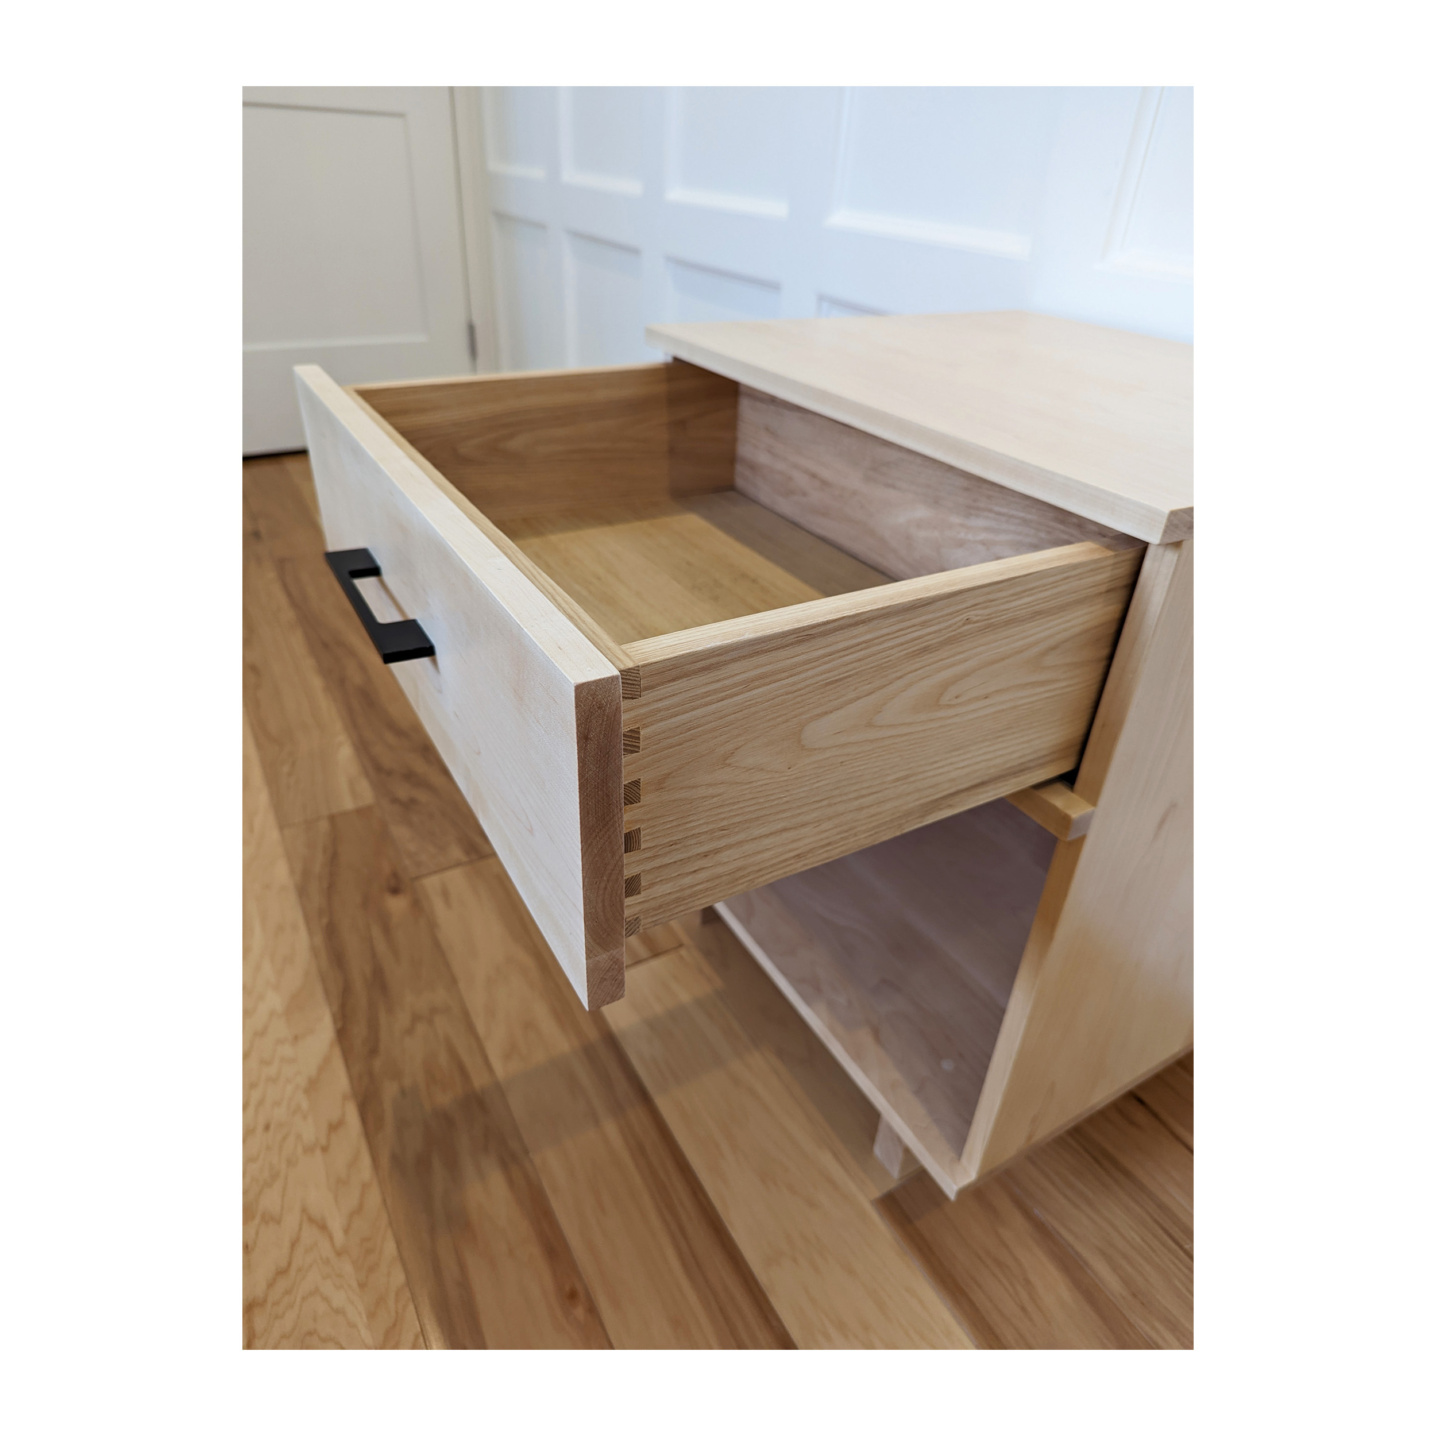 Dovetail Drawers on a Wood Nighstand